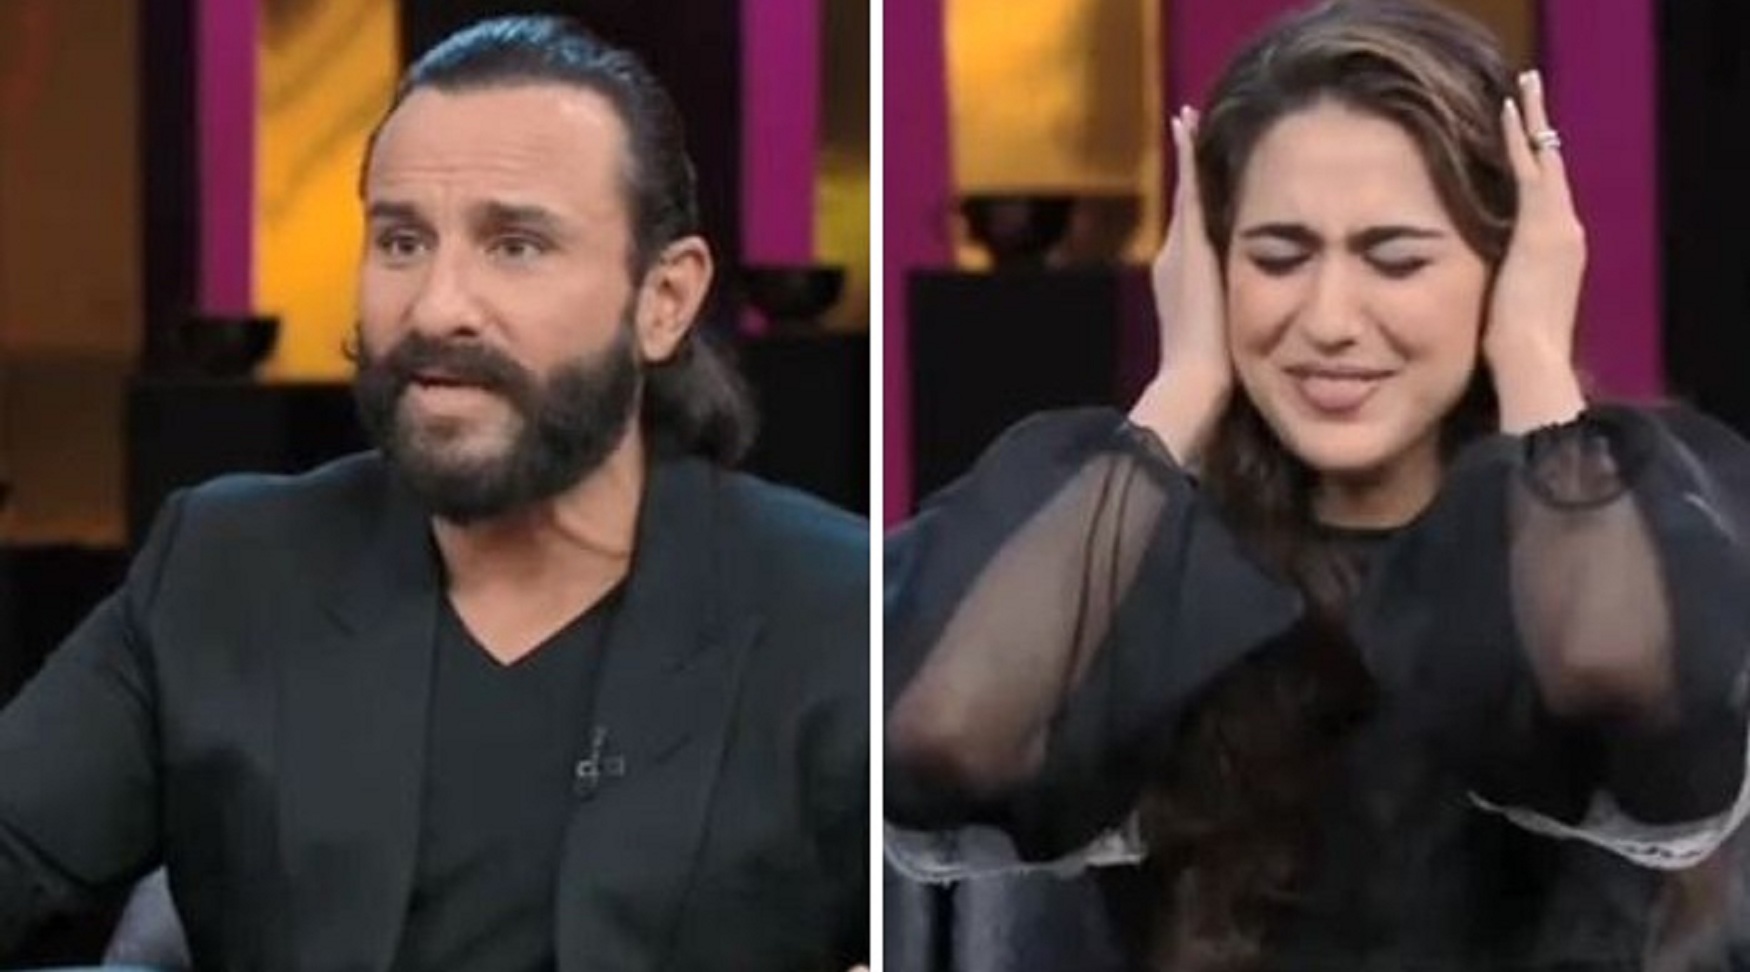 Koffee With Karan: Saif Ali Khan Comments On His Sex Life With Kareena, Making Sara Cringe and Cover Her Ears